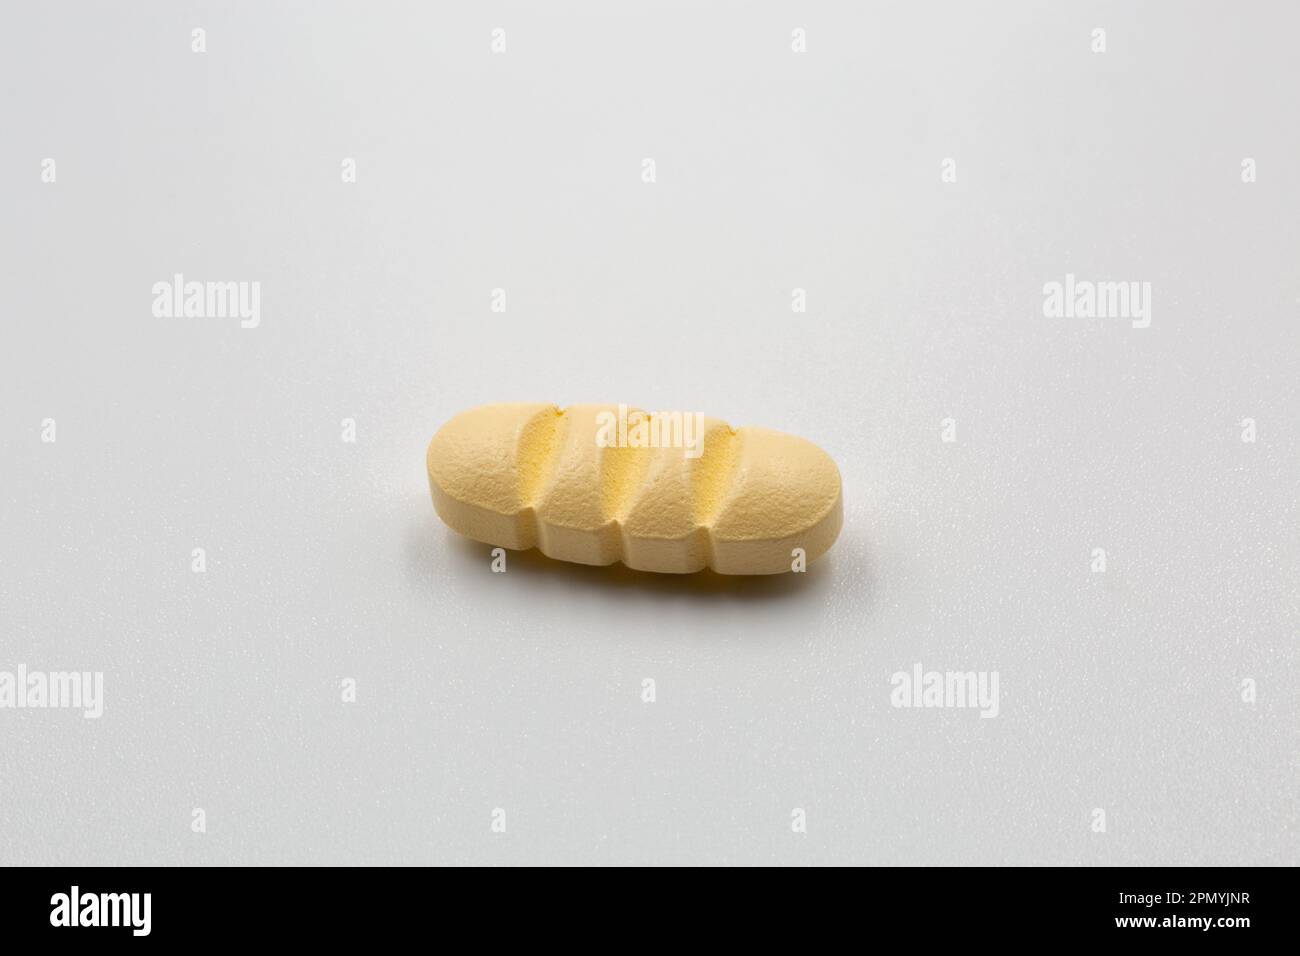 Yellow oblong tablet with dividing strips for dividing into four parts closeup on white. Stock Photo